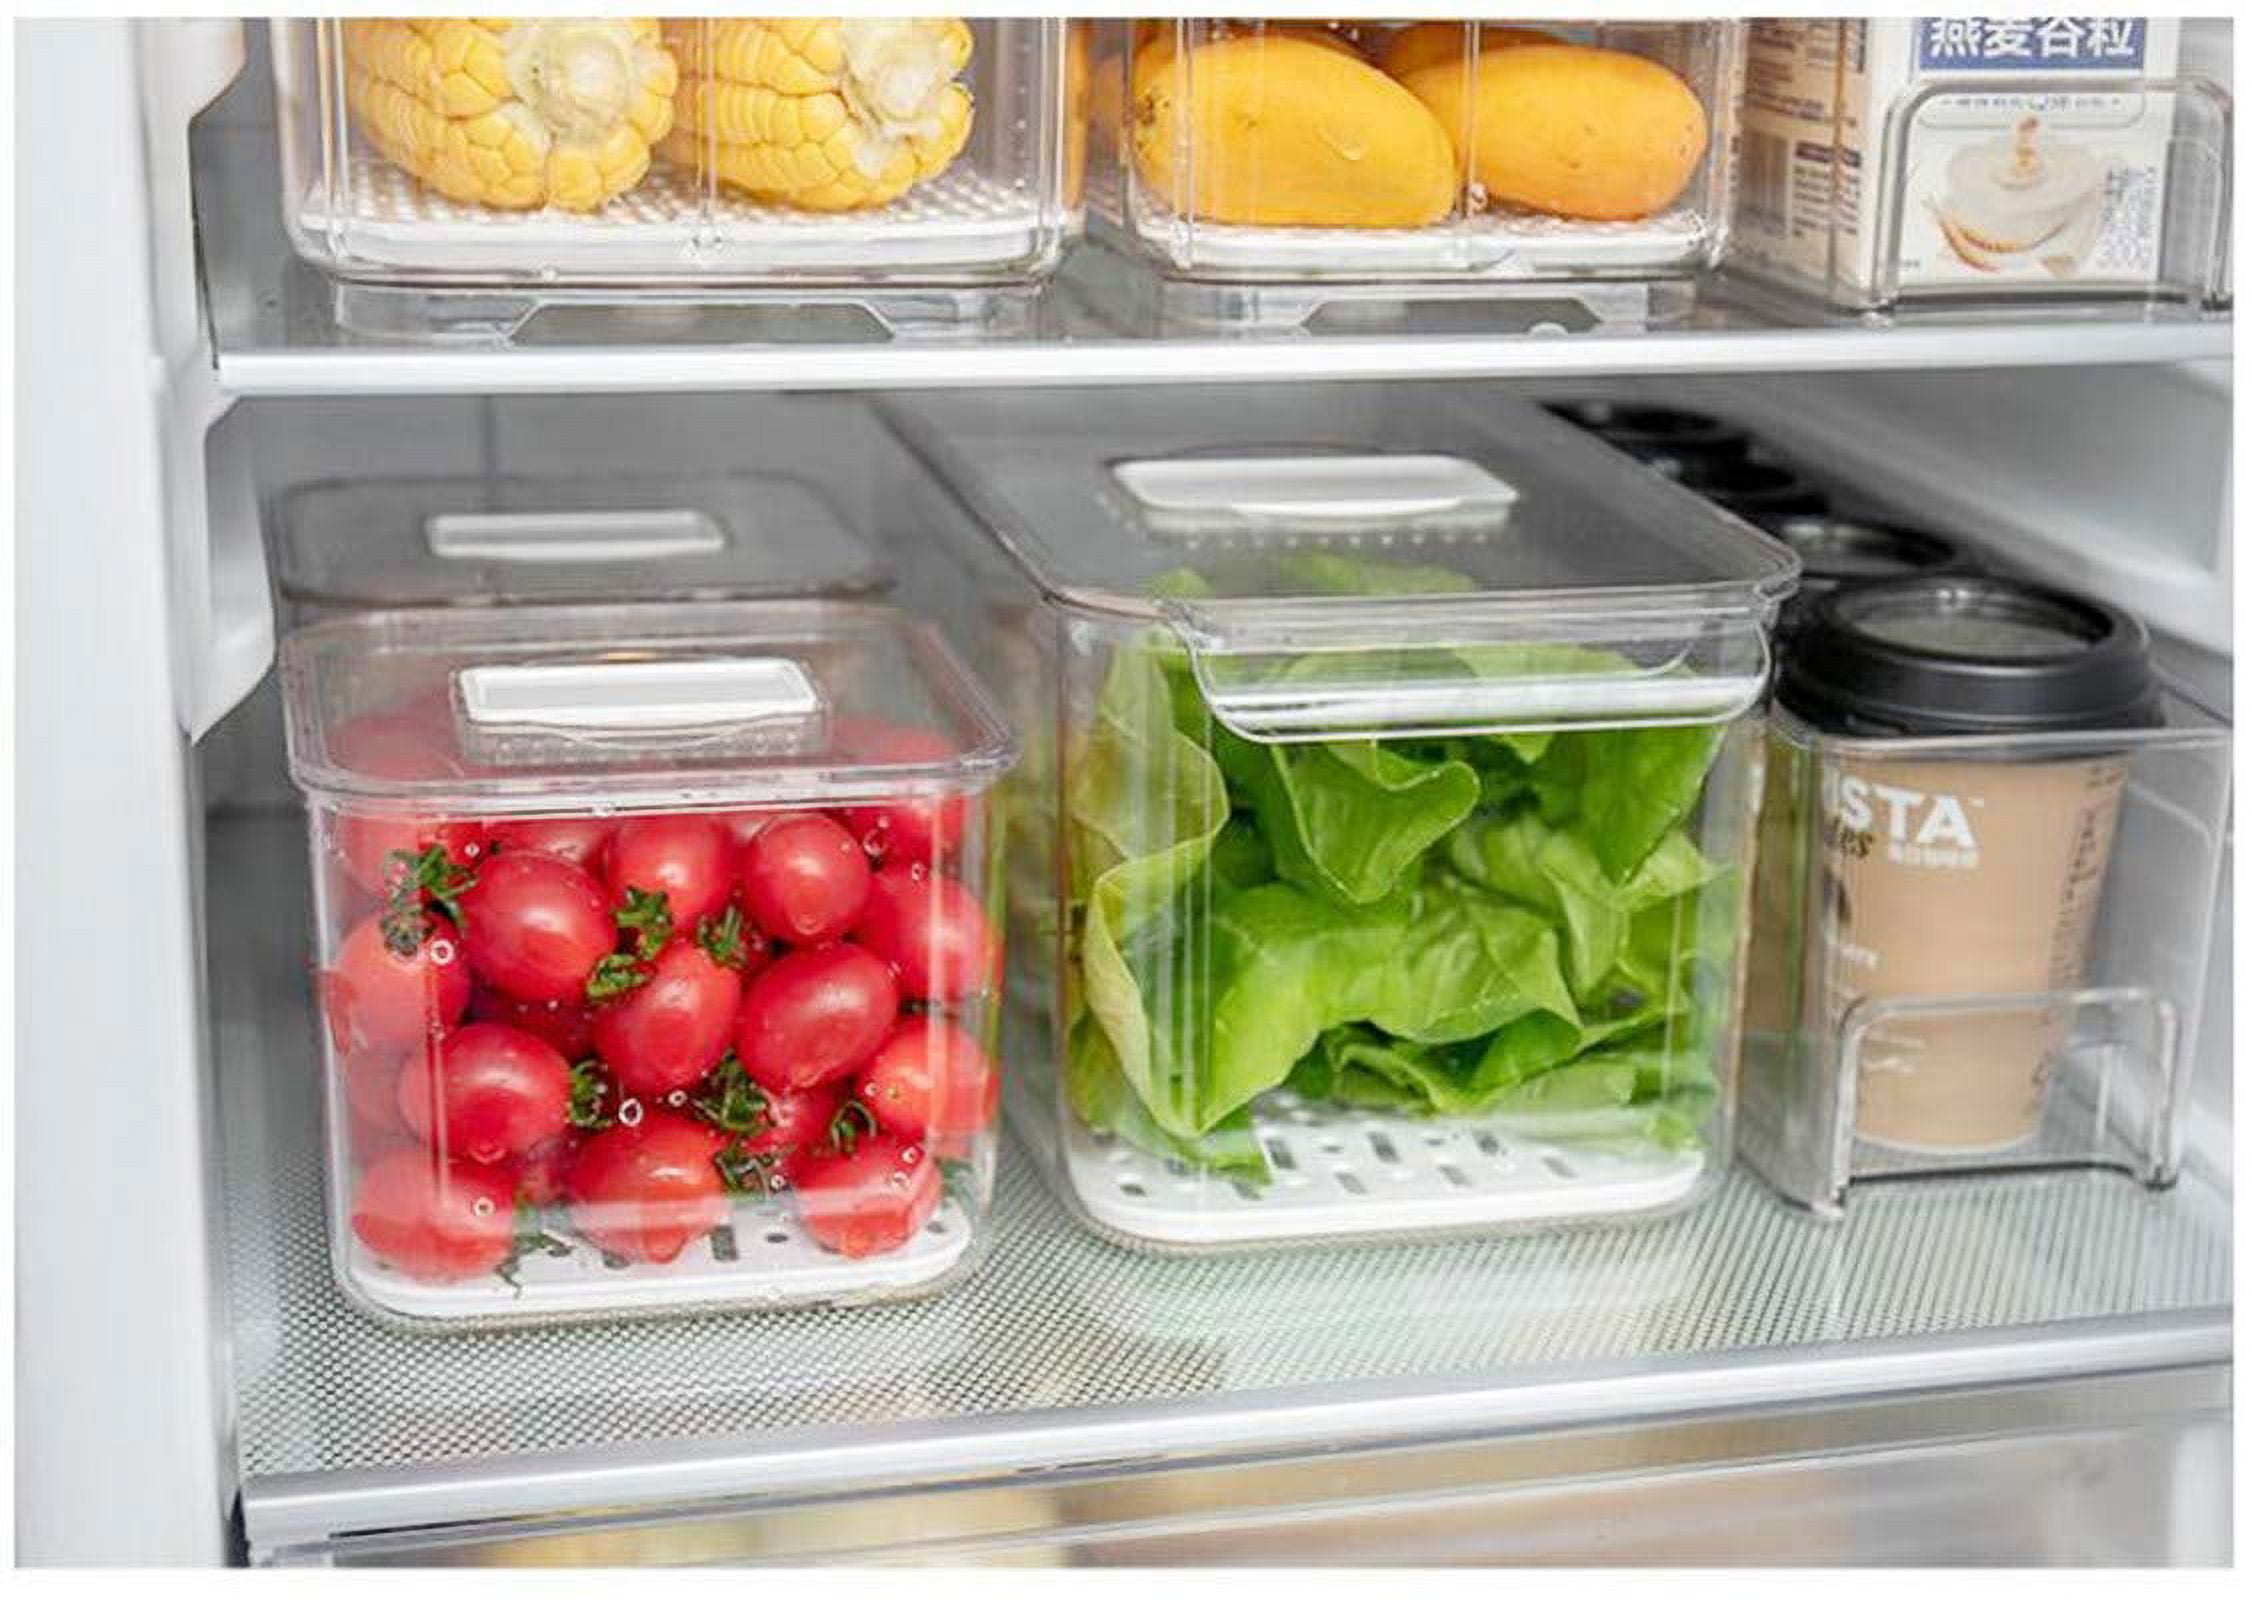  SANNO Fridge Food Storage Containers Produce Saver FreshWorks  Produce Food Storage Container Bin Stackable Refrigerator Kitchen Organizer  Keeper, with Removable Drain Tray to Keep Fresh: Home & Kitchen